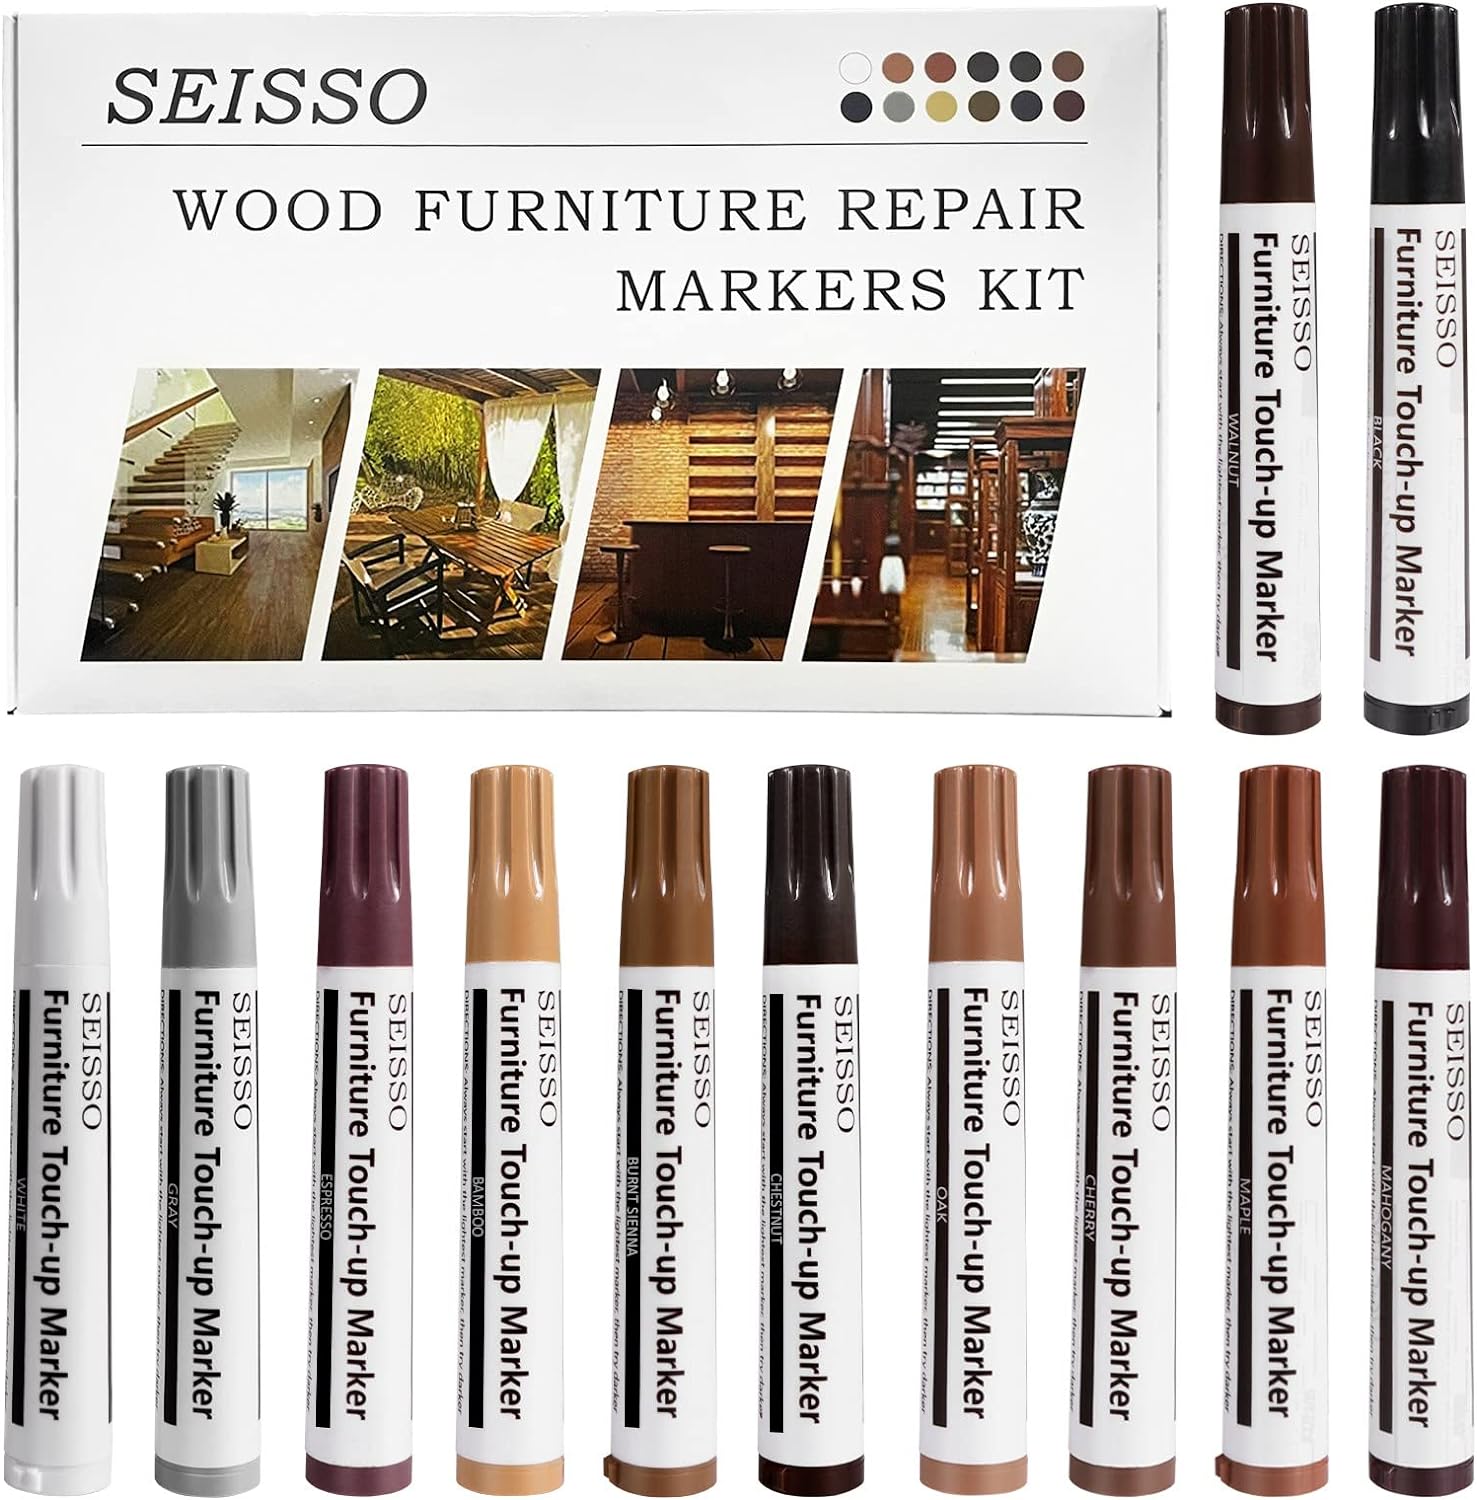 SEISSO Furniture Touch Up Markers, Wood Repair Kit for Furniture, 12 Colors Wood Touch Up Markers for Scratches, New Upgrade Furniture Repair Kit - Restore Wooden Table, Cabinet, Floors, Door